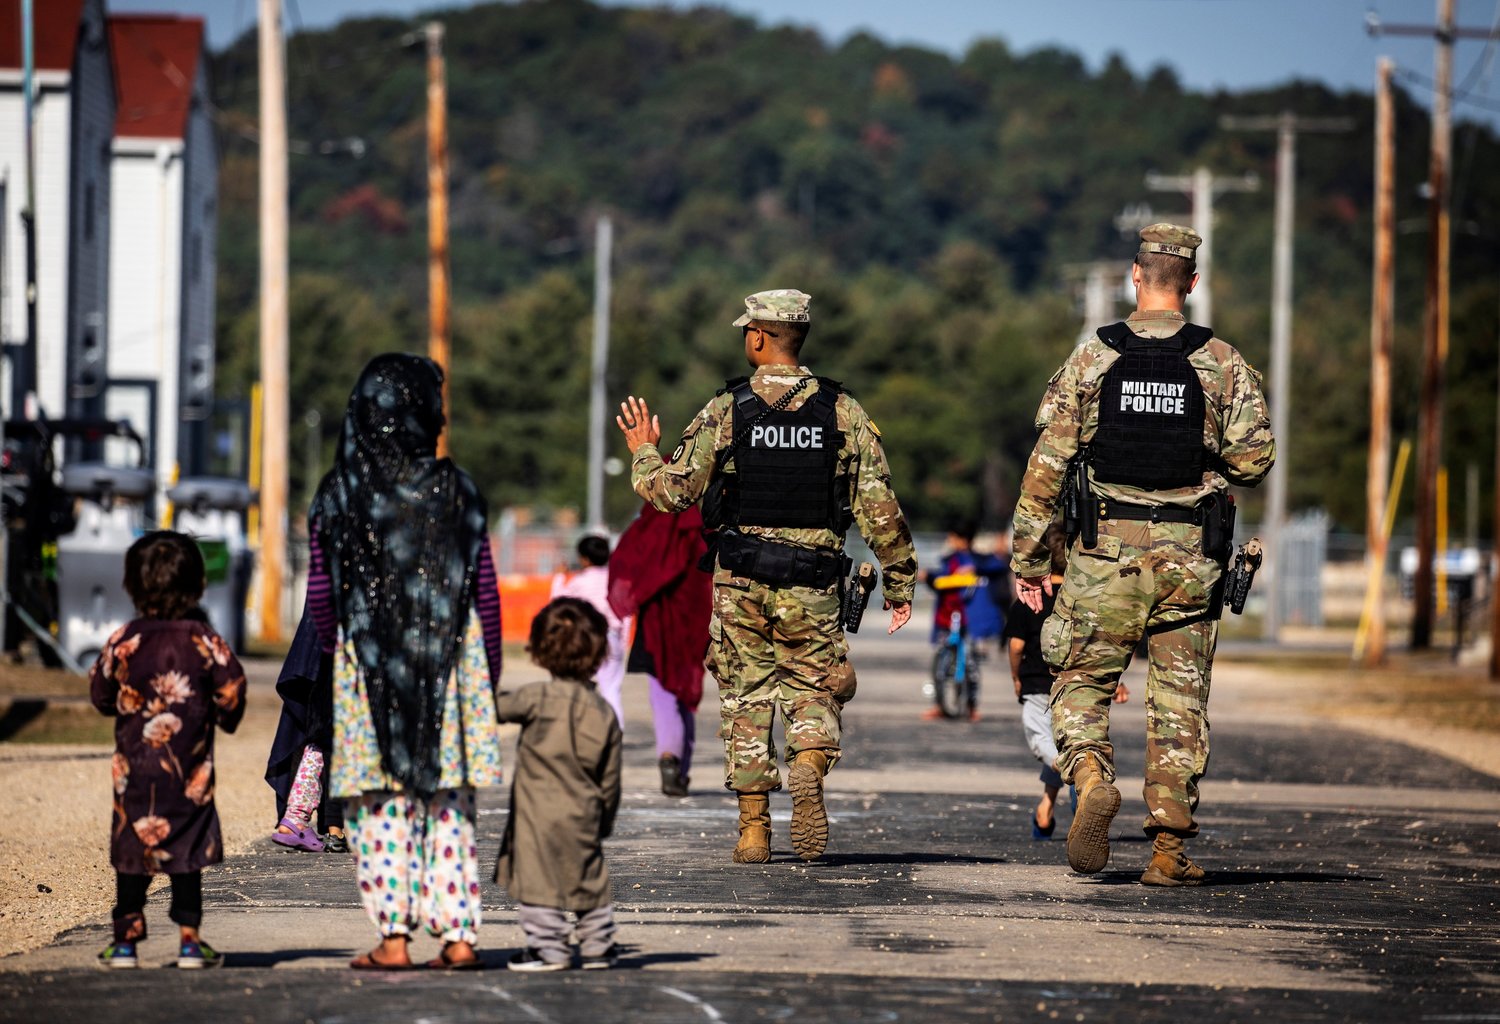 U.S. Military Police walk past Afghan refugees at the Village at Fort McCoy U.S. Army base, in Wisconsin, Sept. 30, 2021.